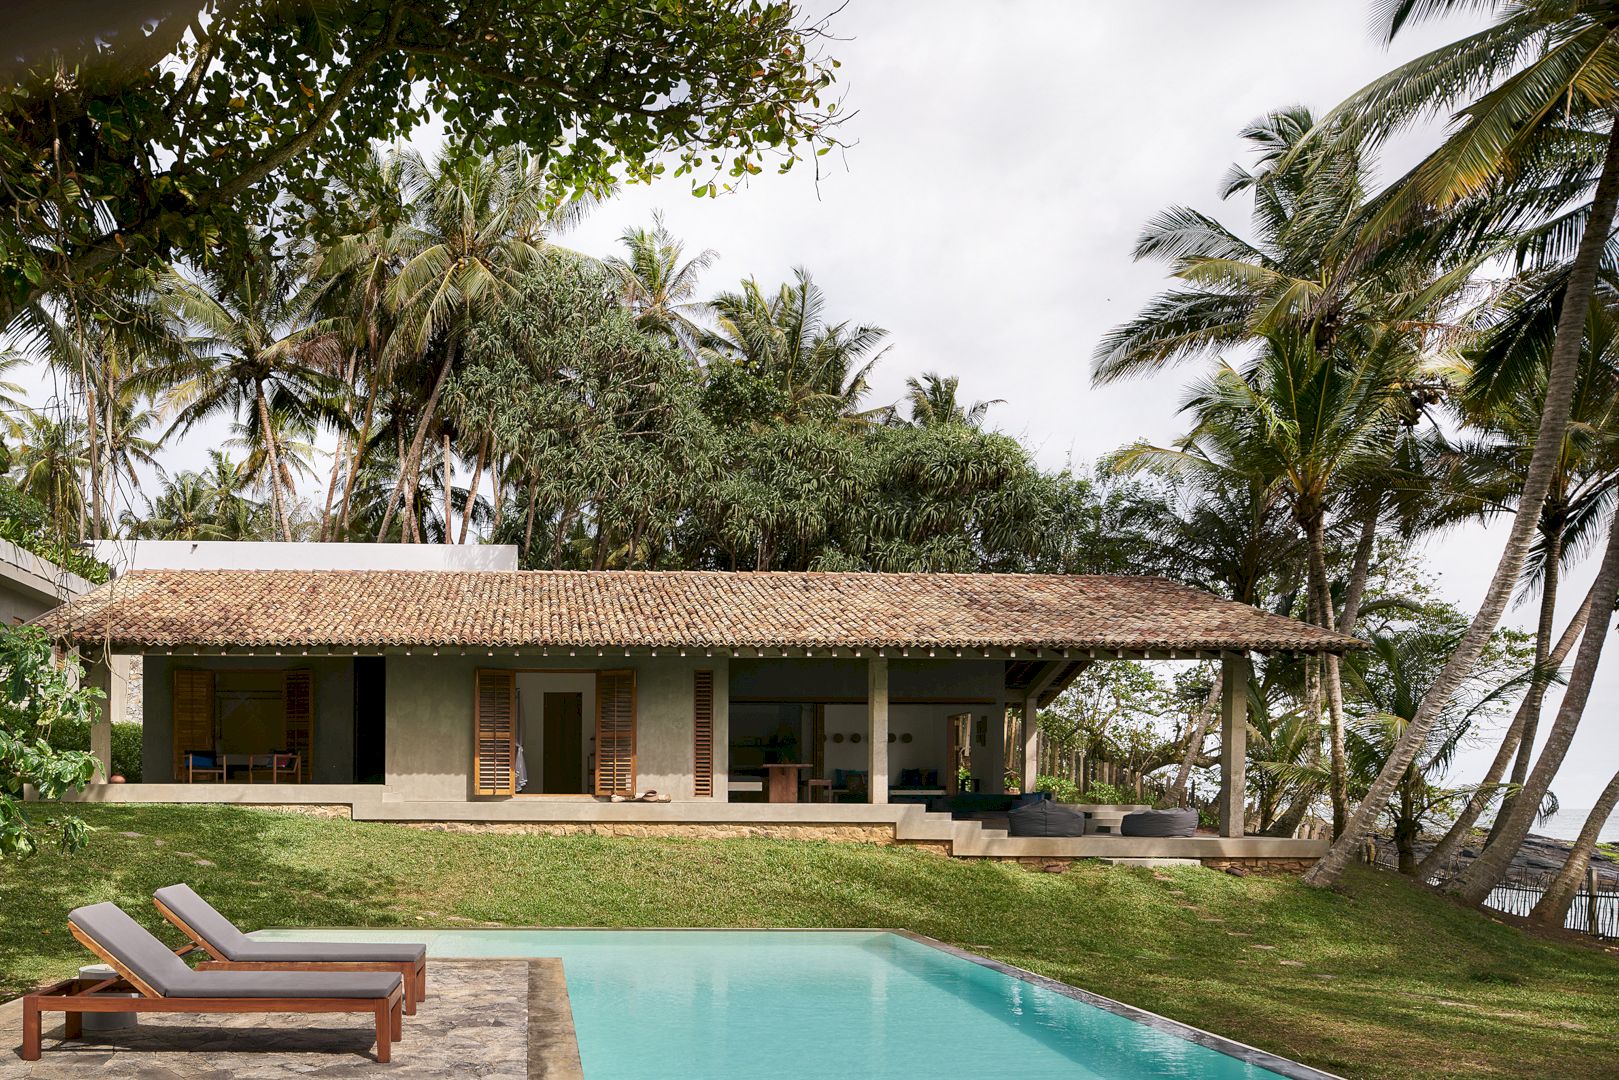 K House: An Exclusive Villa Resort with A Strong Connection to Nature